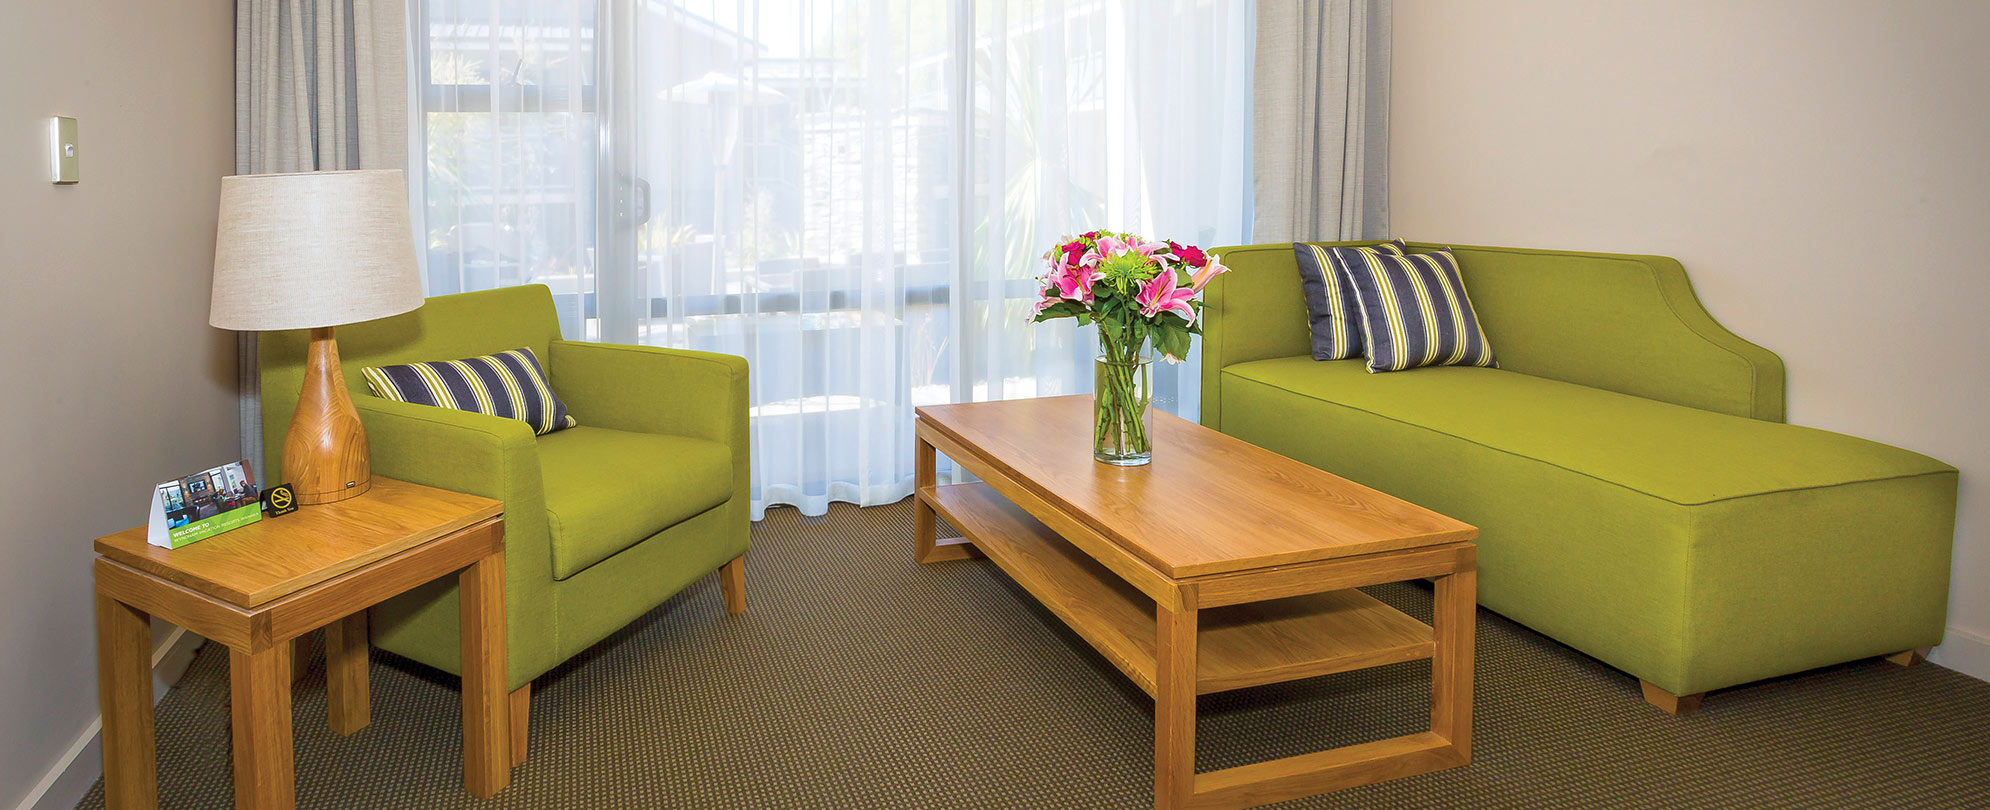 A lounge area in the standard suite at Club Wyndham Wanaka.